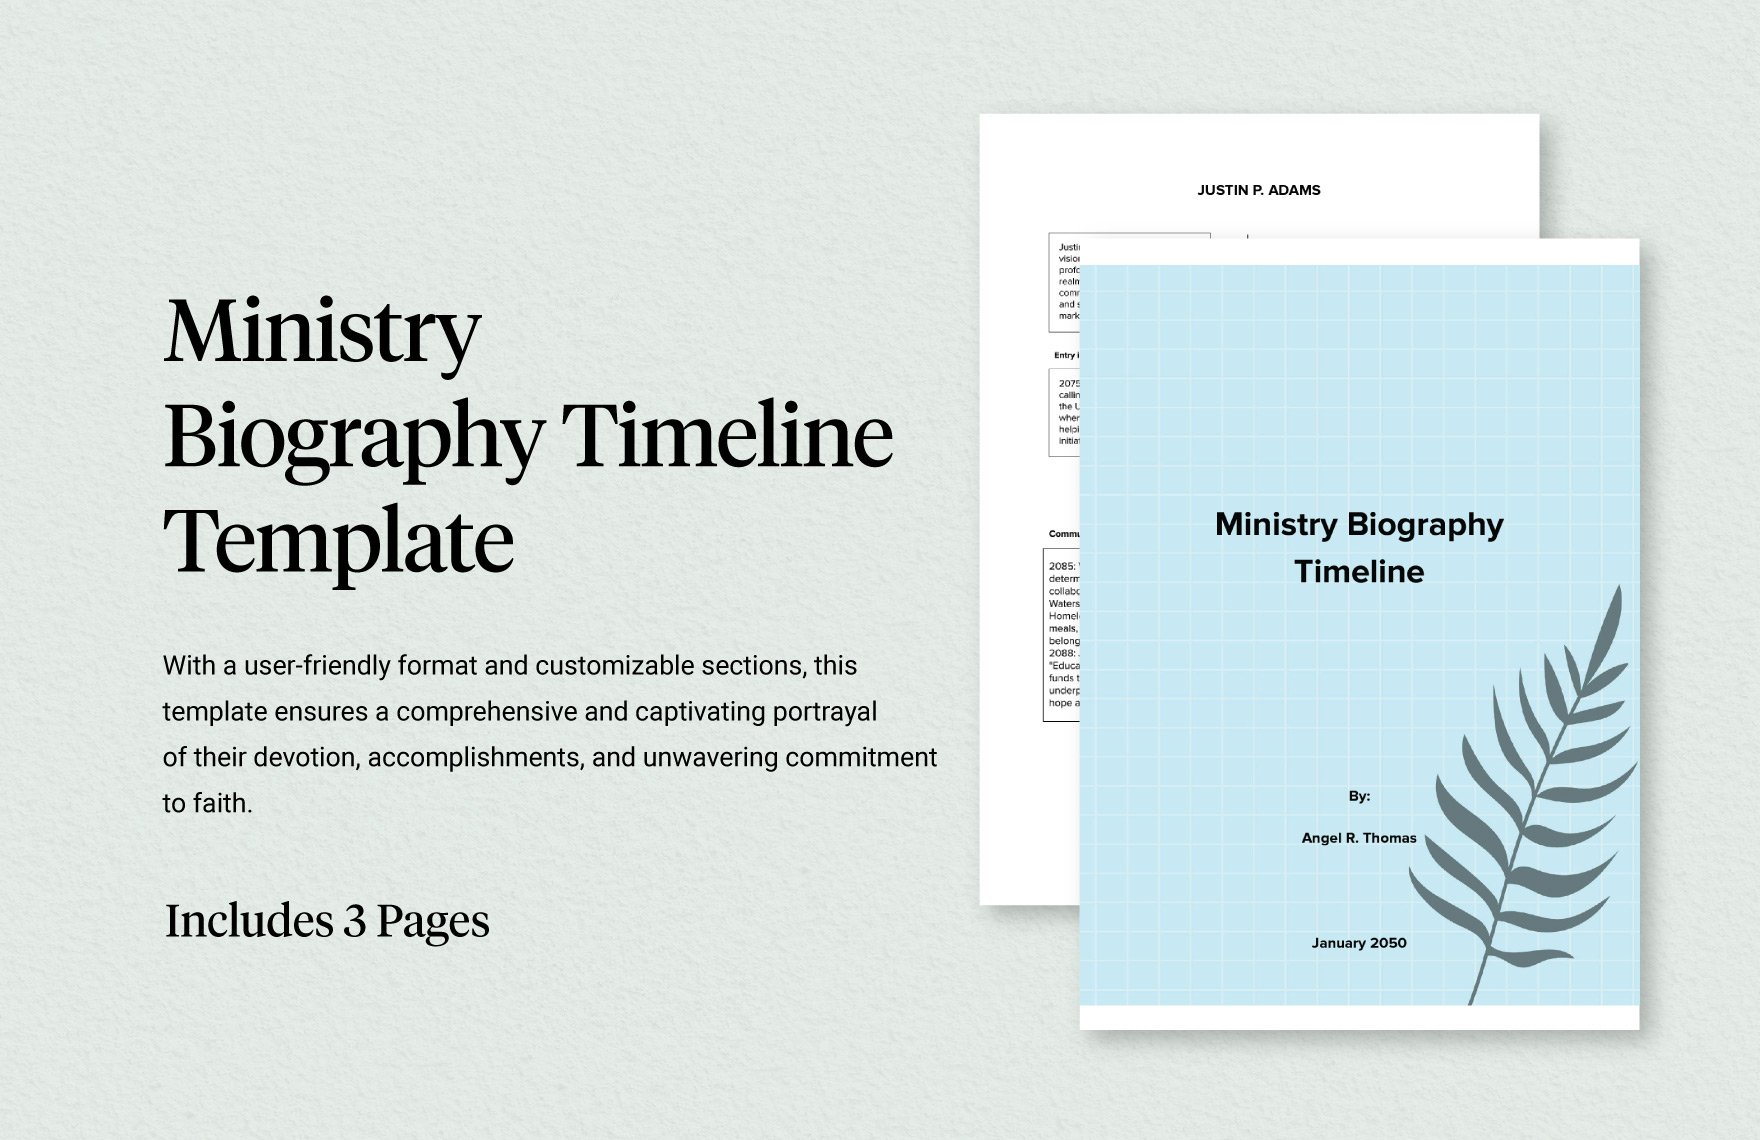 Ministry Biography Timeline Template